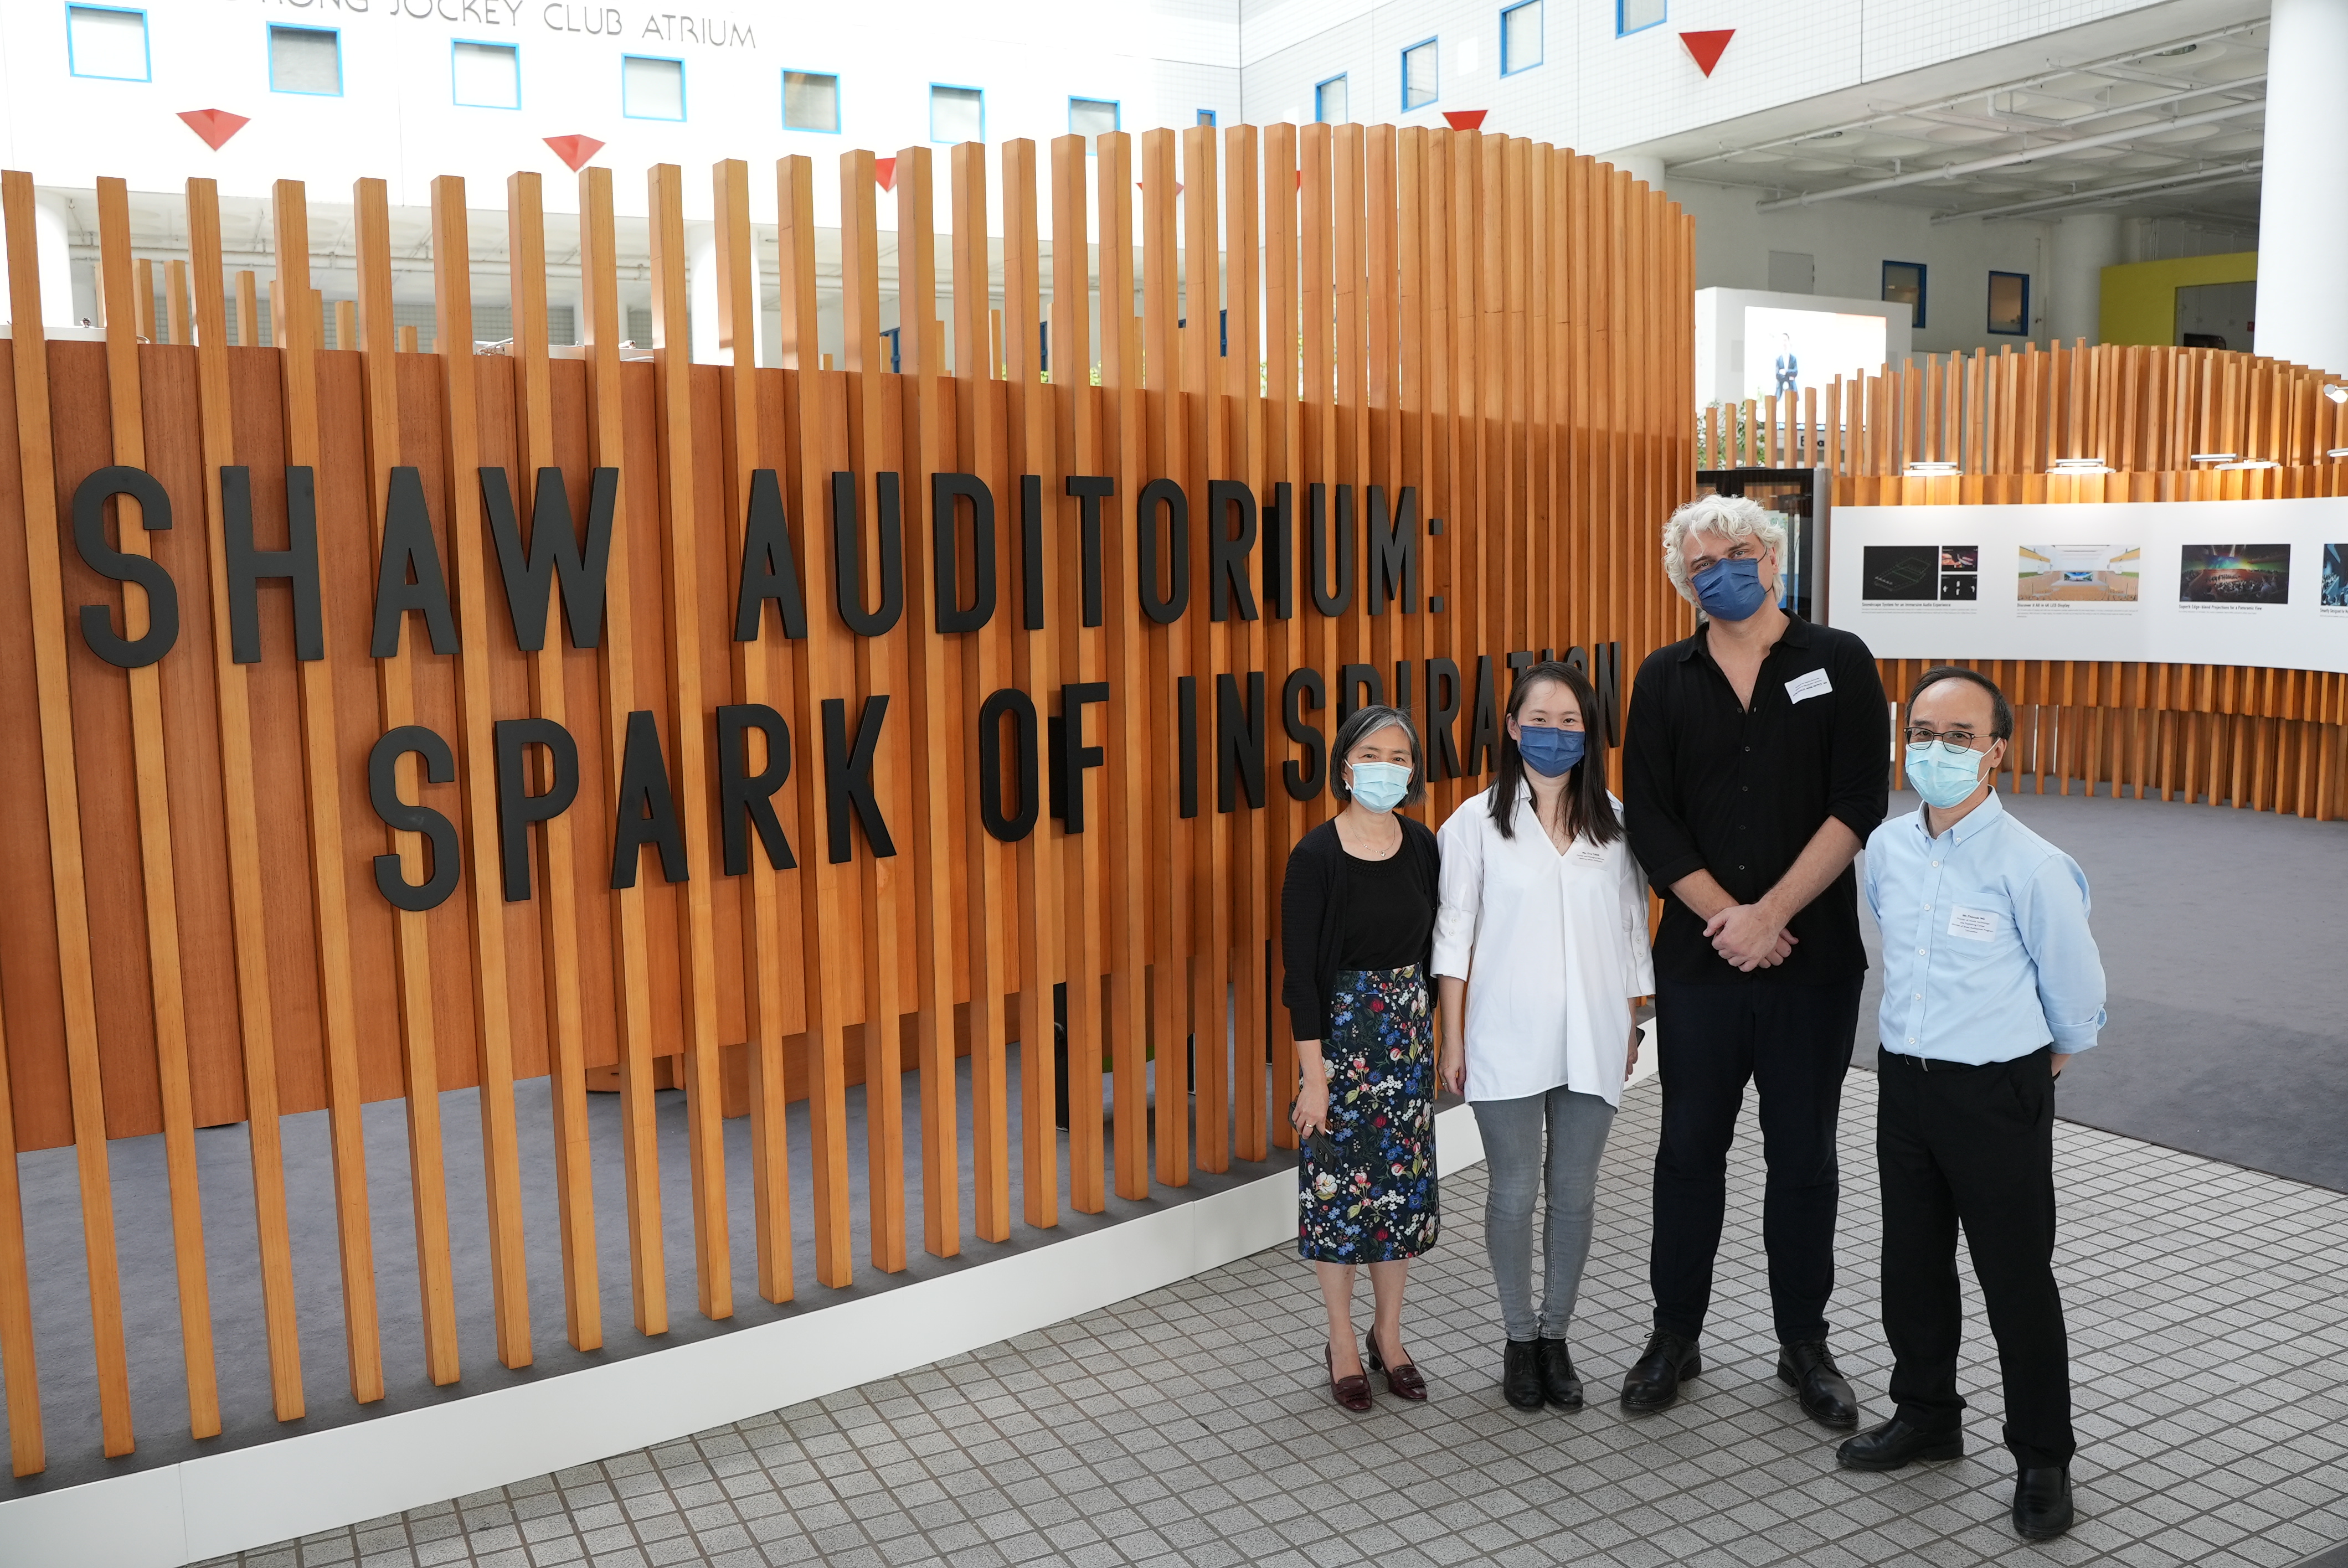 Shaw Auditorium: Exciting Possibilities Await | Hong Kong University of Science and Technology